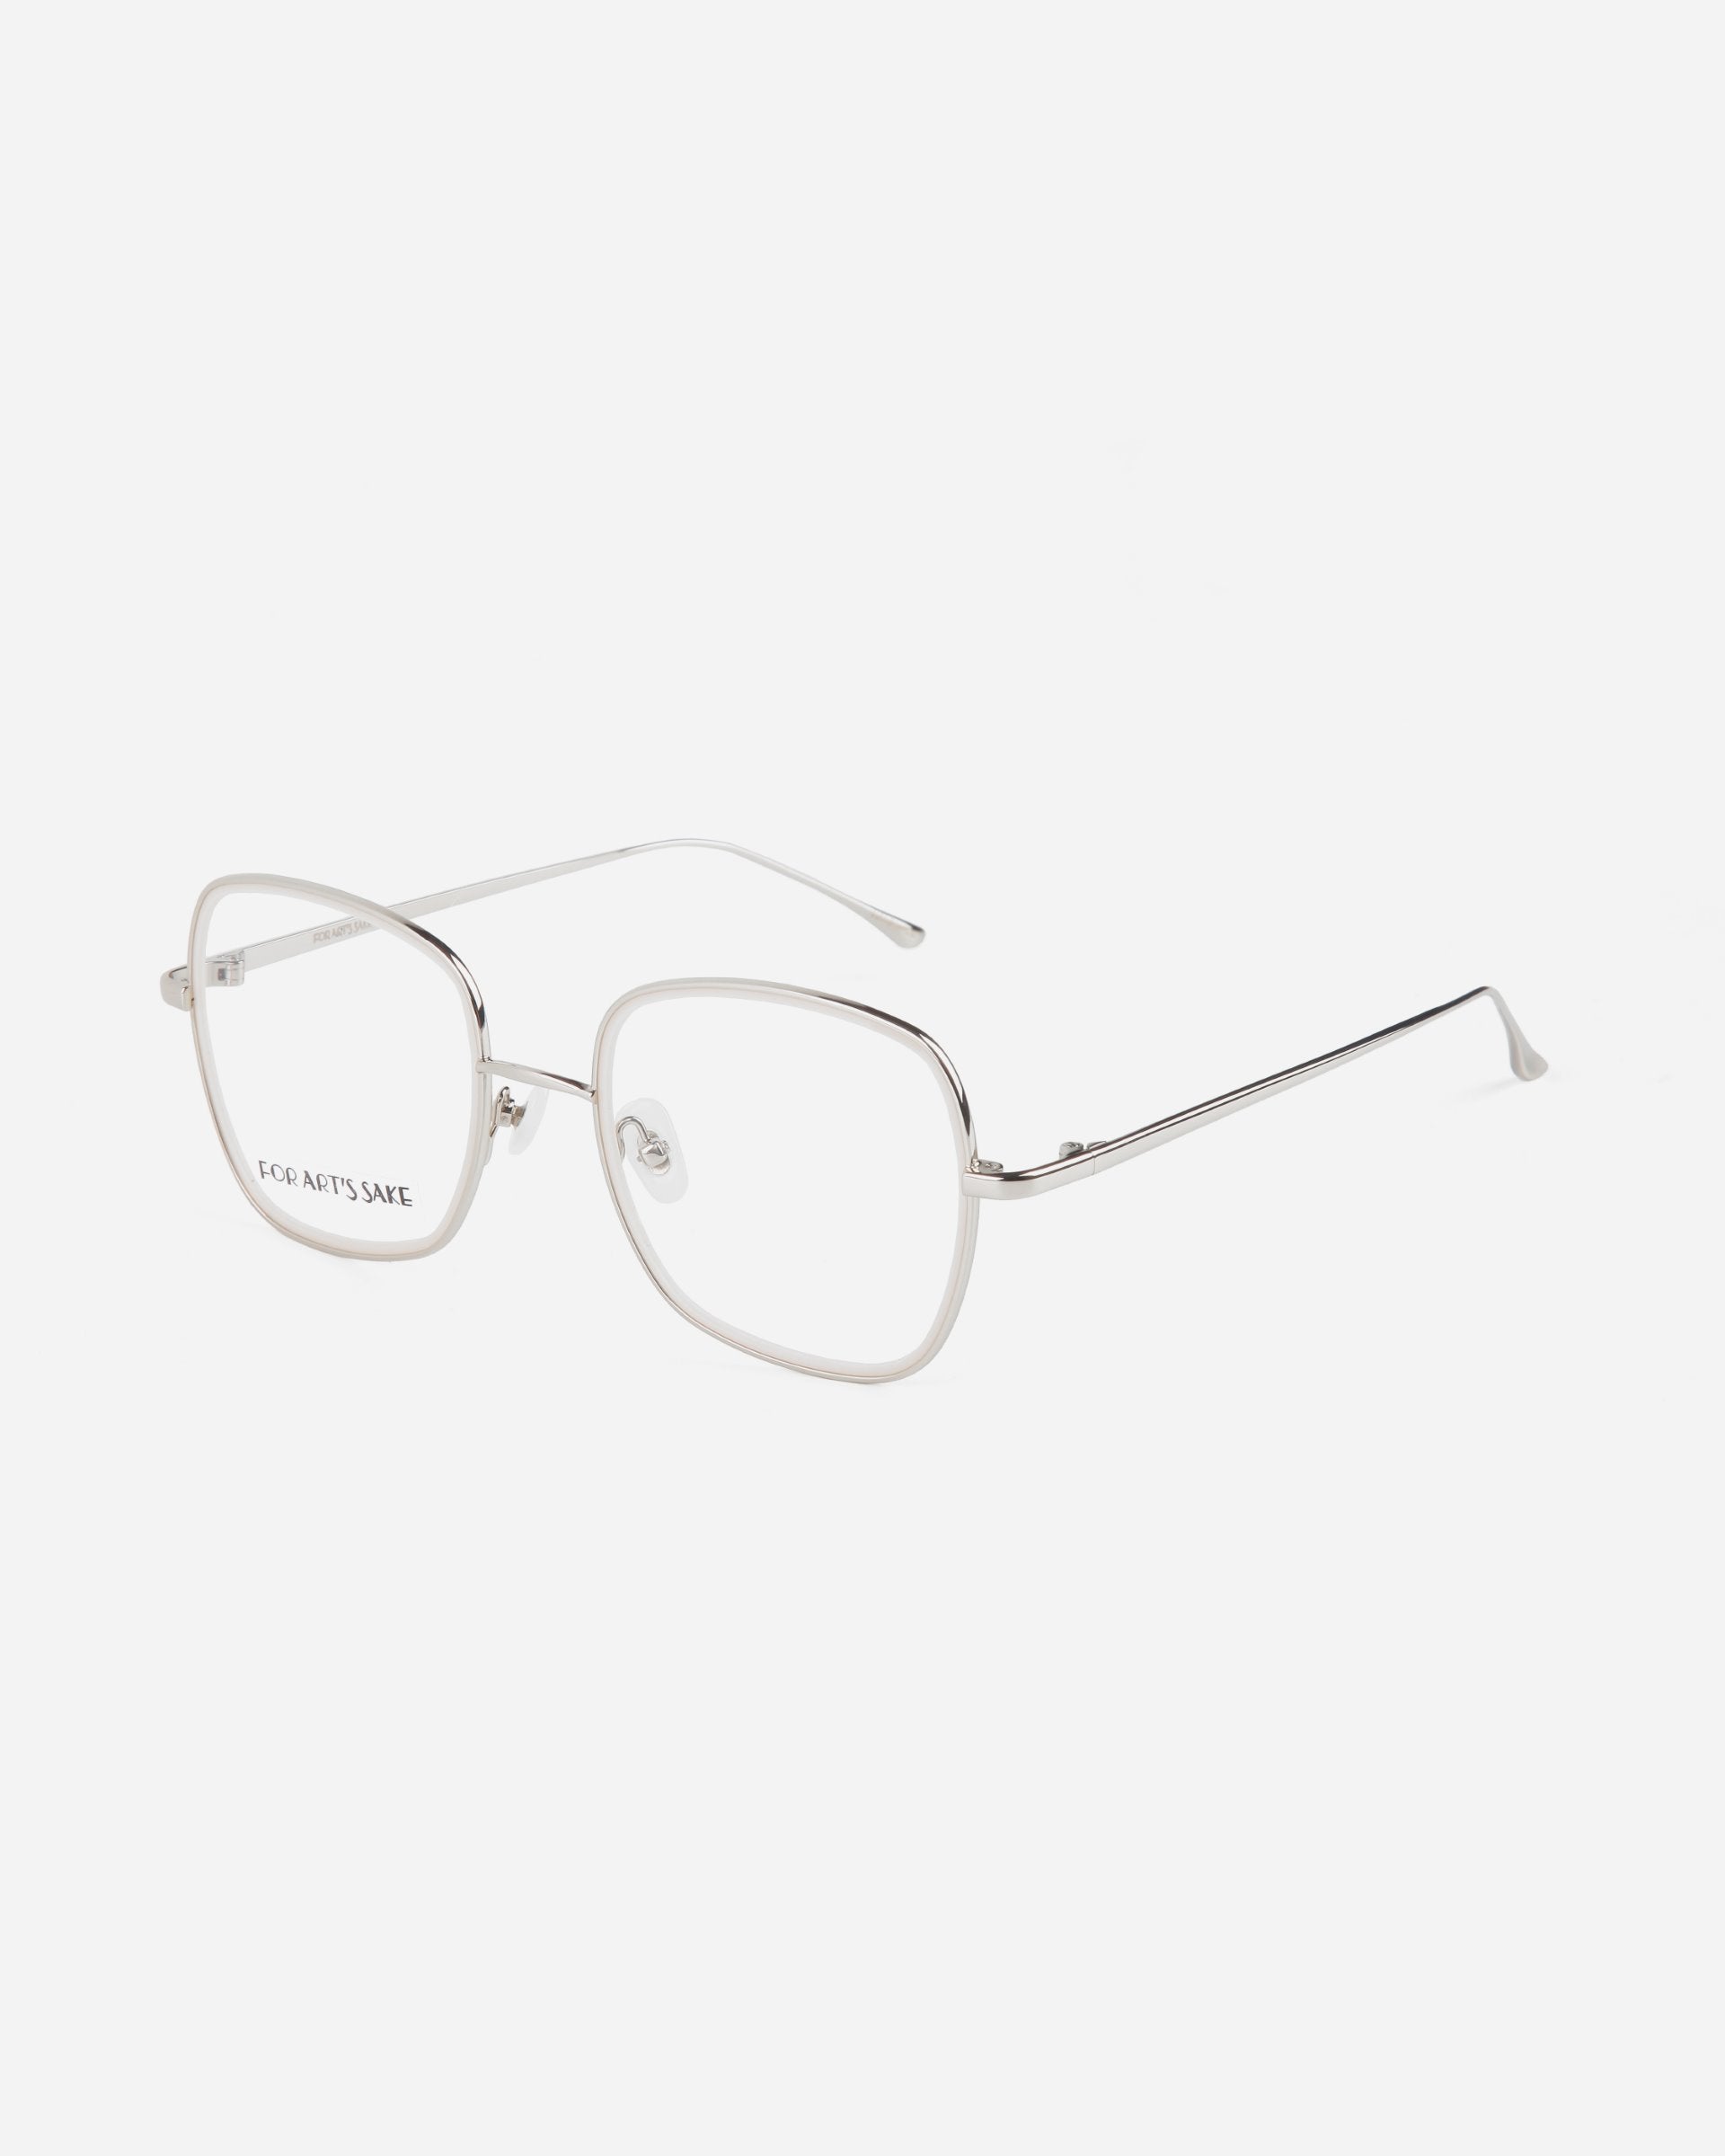 A pair of rectangular, thin, silver-framed Coconut eyeglasses from For Art's Sake® with clear, ultra-lightweight lenses. The left lens has text that reads "ECO ARTS SAVE." The glasses are viewed at an angle against a white background.